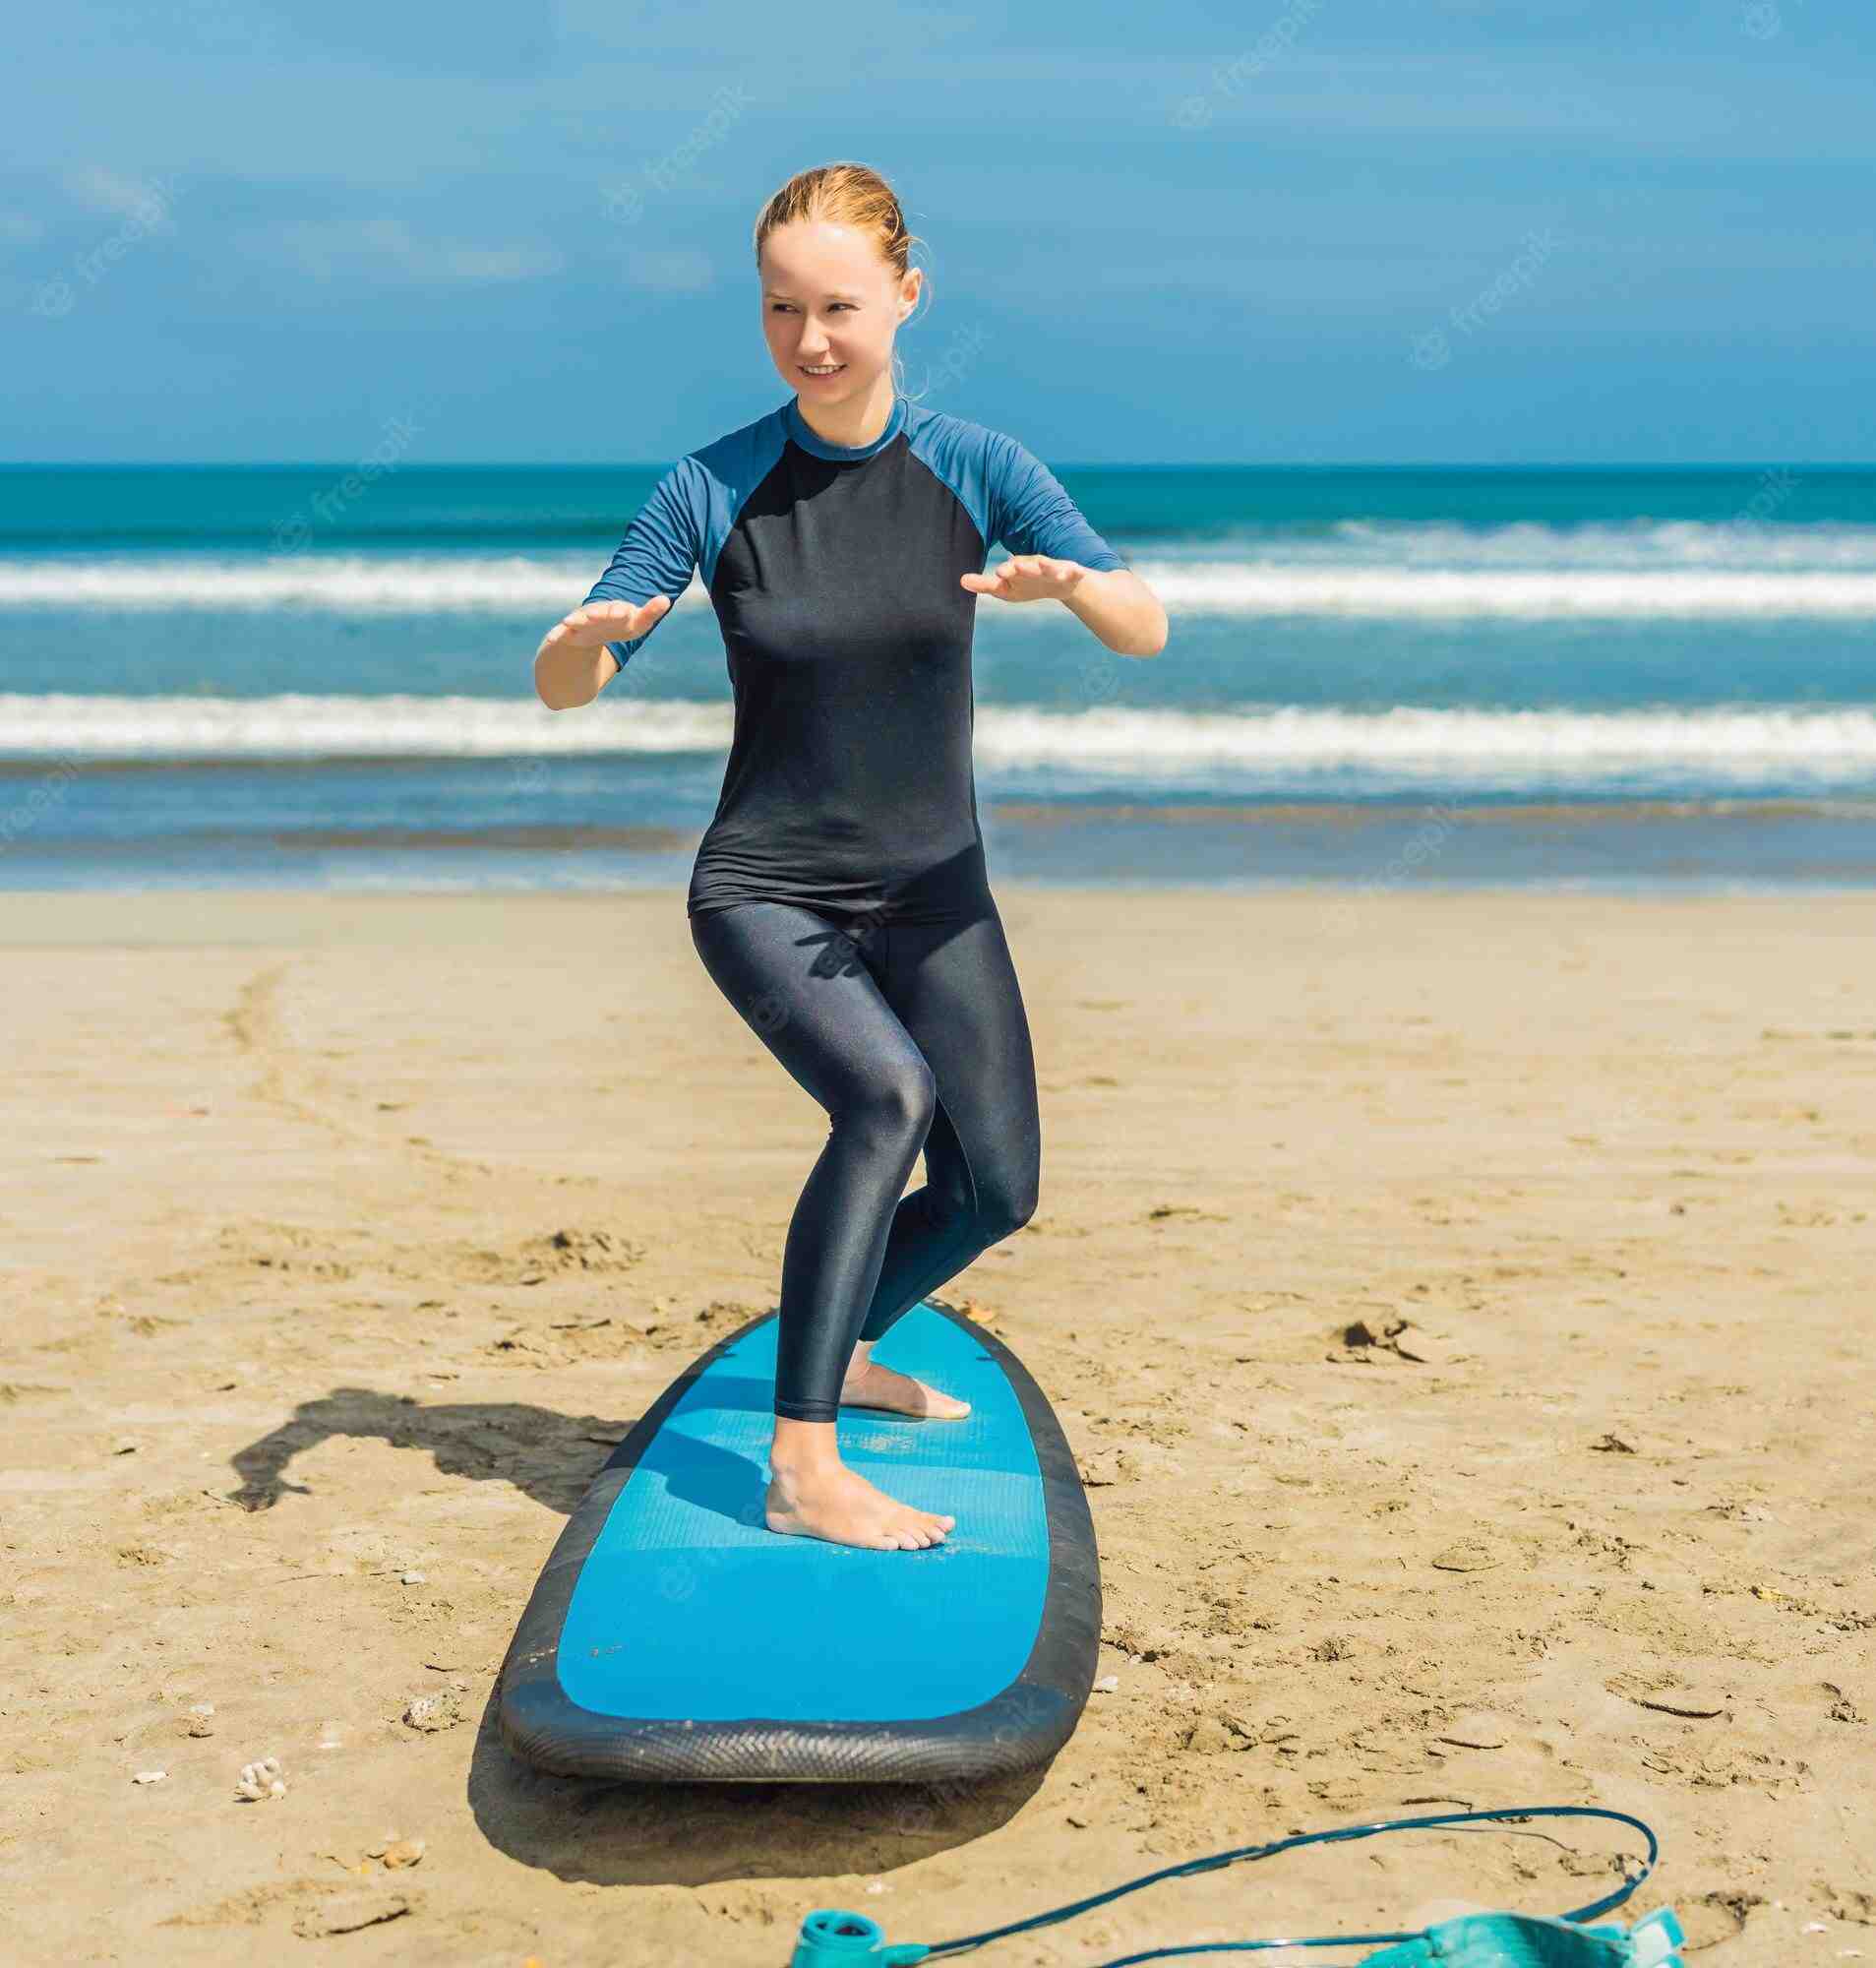 How long should your first surf lesson be?